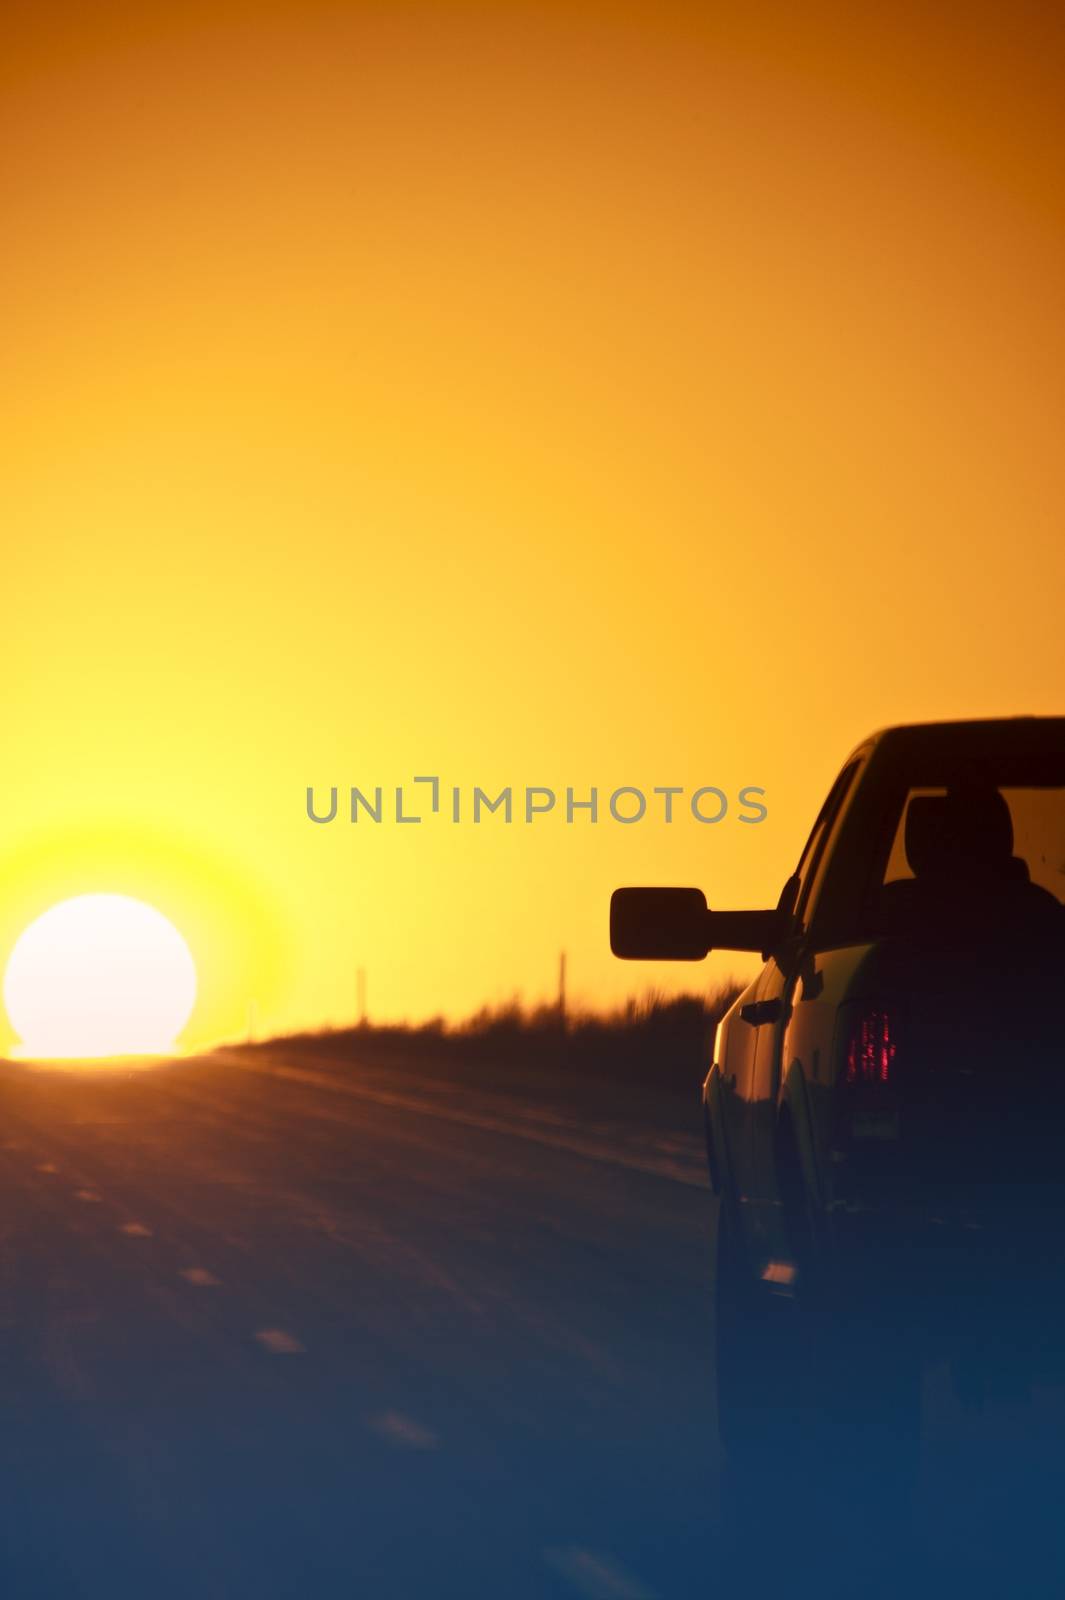 Sunset Outback Highway. Pickup on the Highway - Sunset. Vertical Photo.